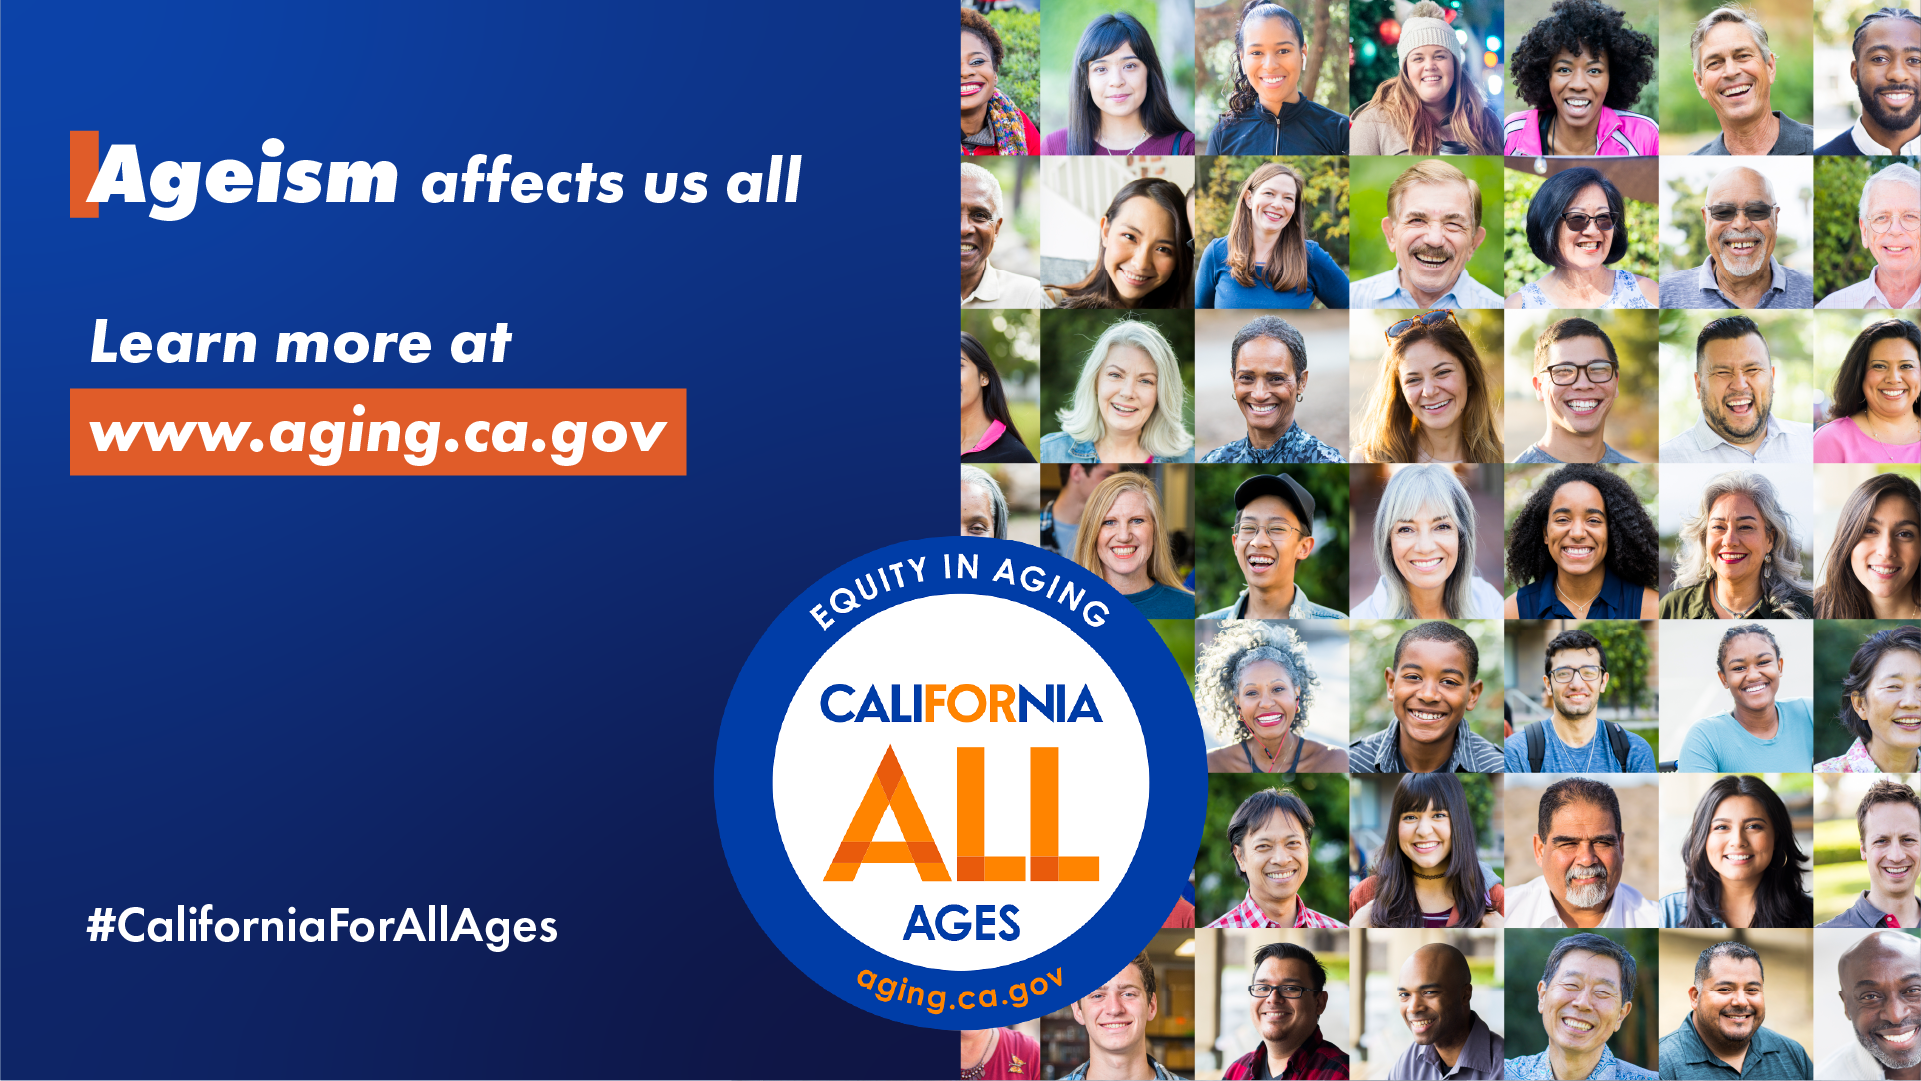 Ageism affects us all. Learn more at aging.ca.gov. California For All Ages logo, #CaliforniaForAllAges. photo montage of faces of people from diverse race, ethnicity, and ages.